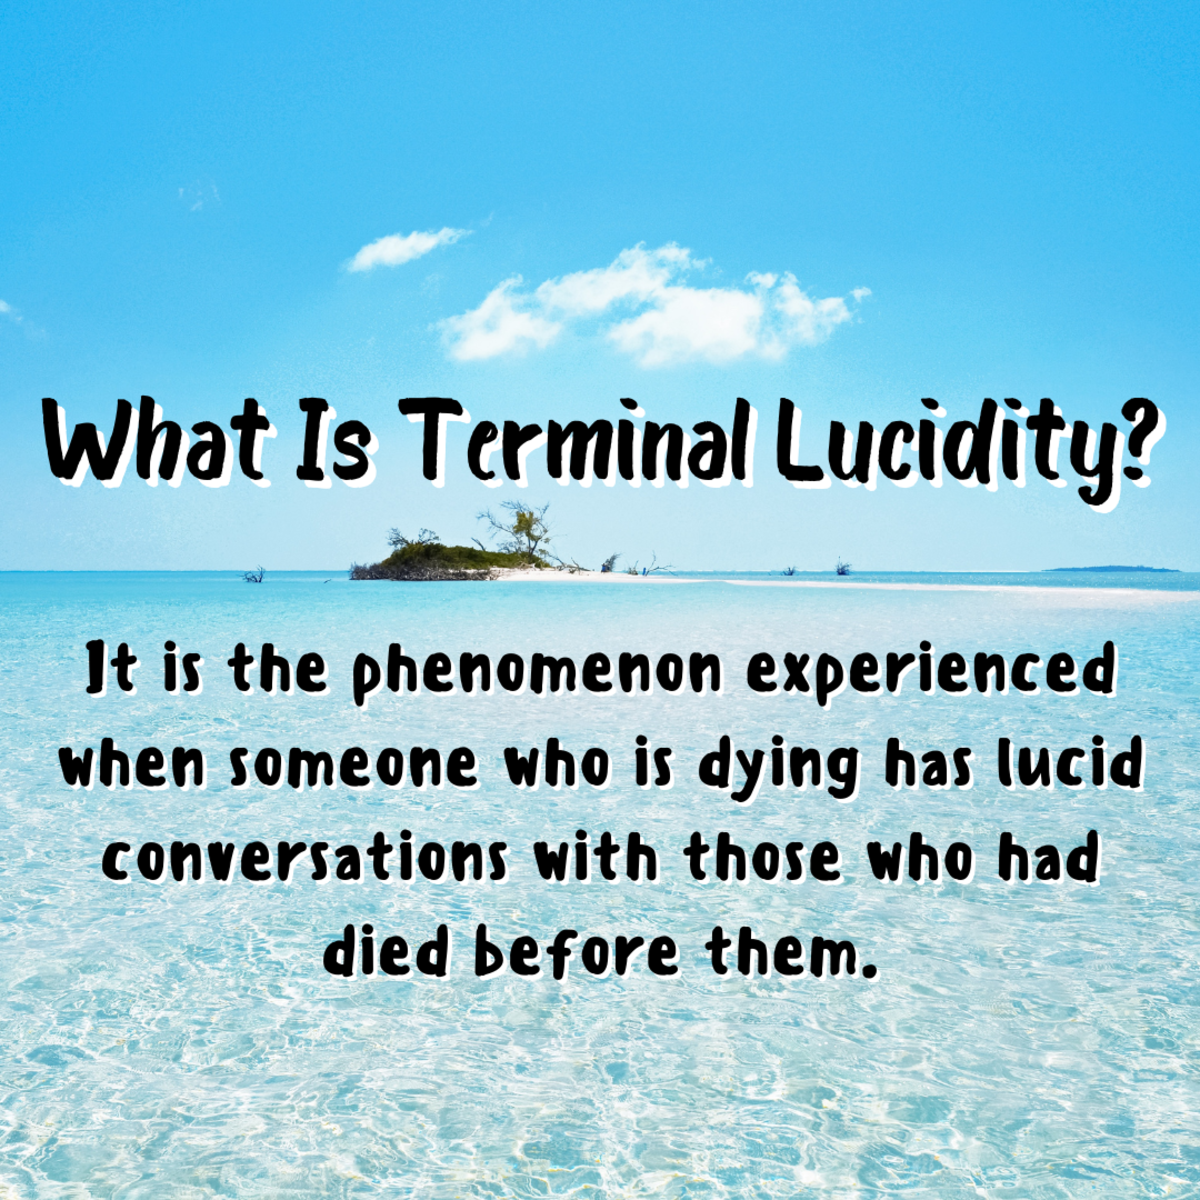 'Terminal lucidity' might point to life after death.